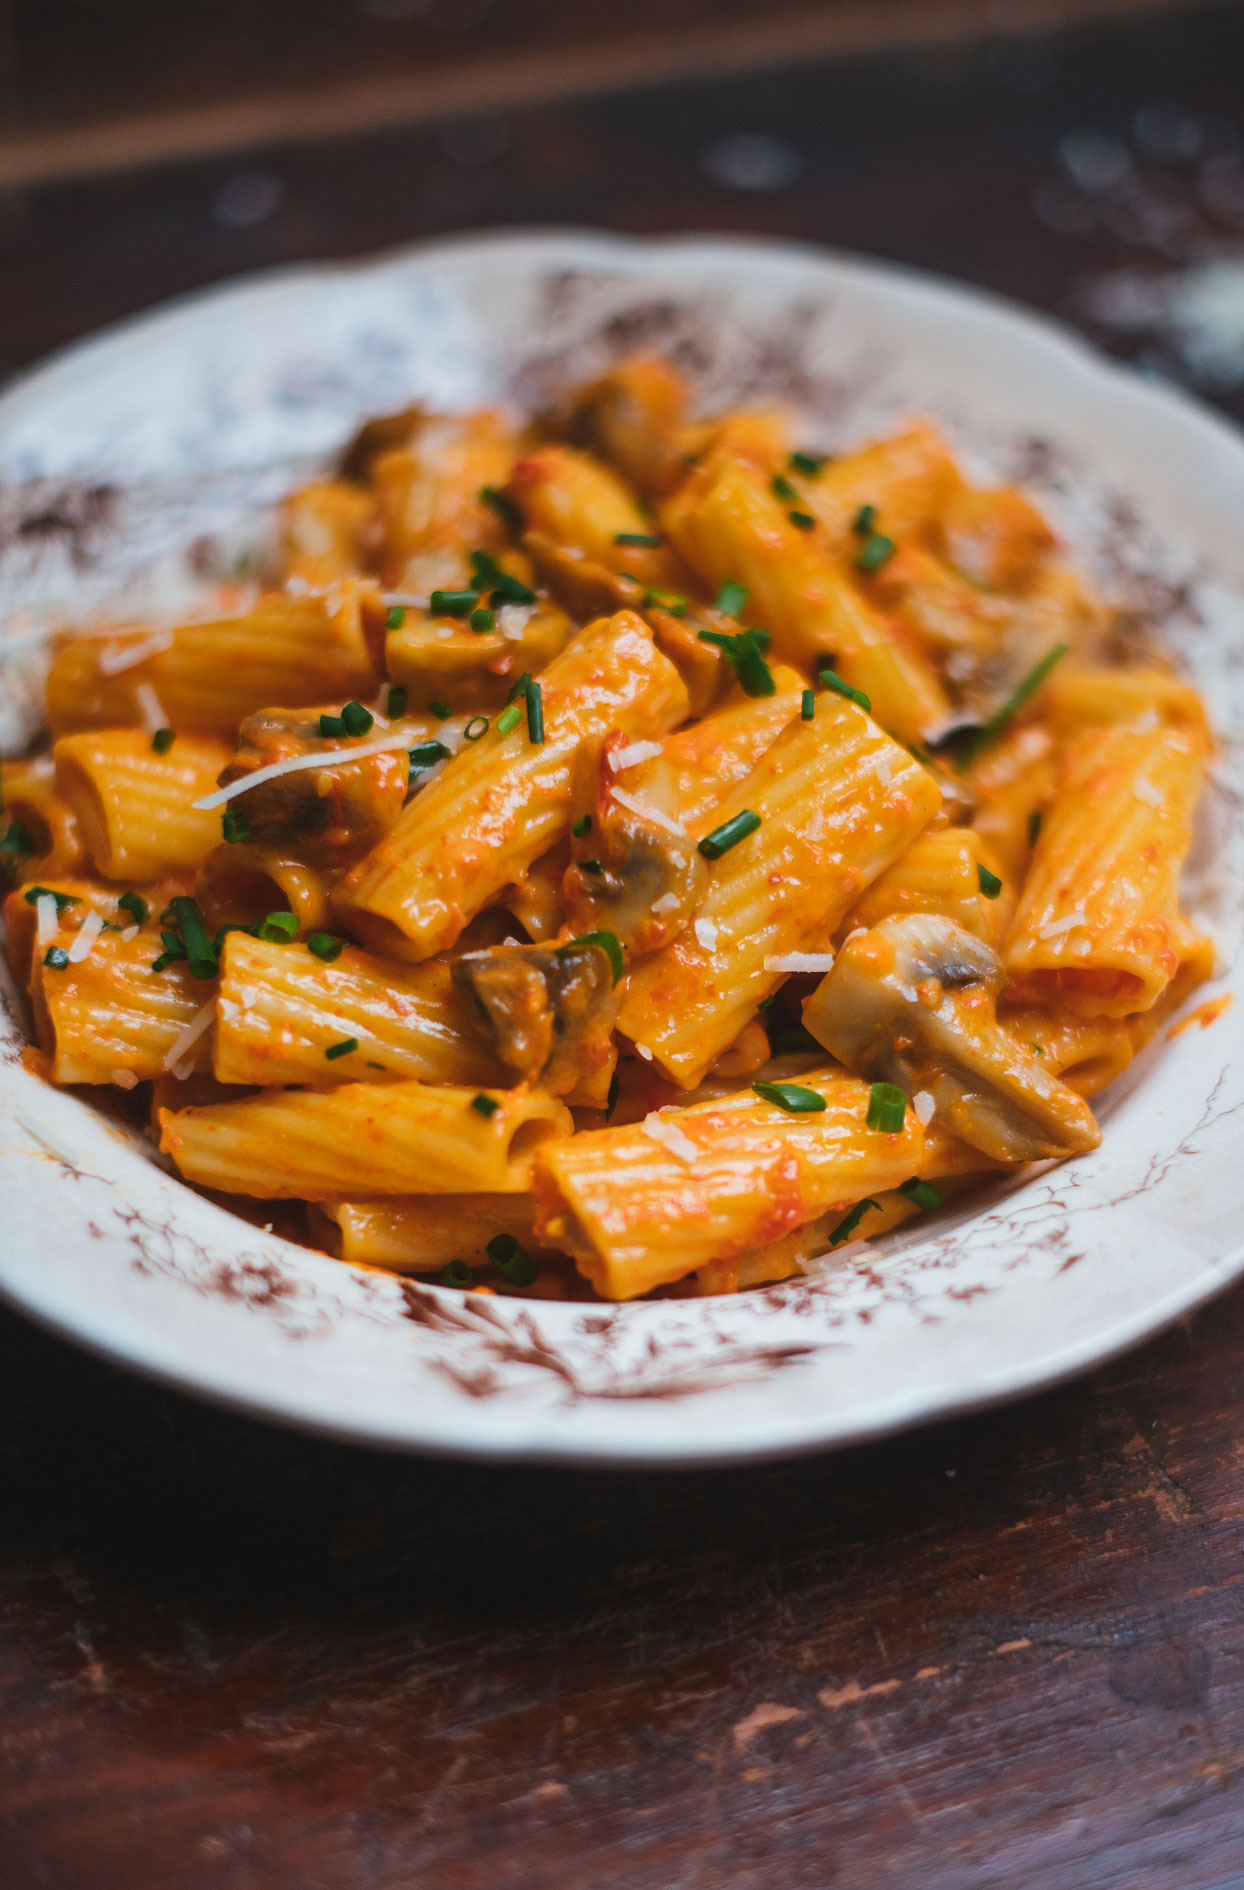 Rigatoni with roasted red pepper puree and mushrooms